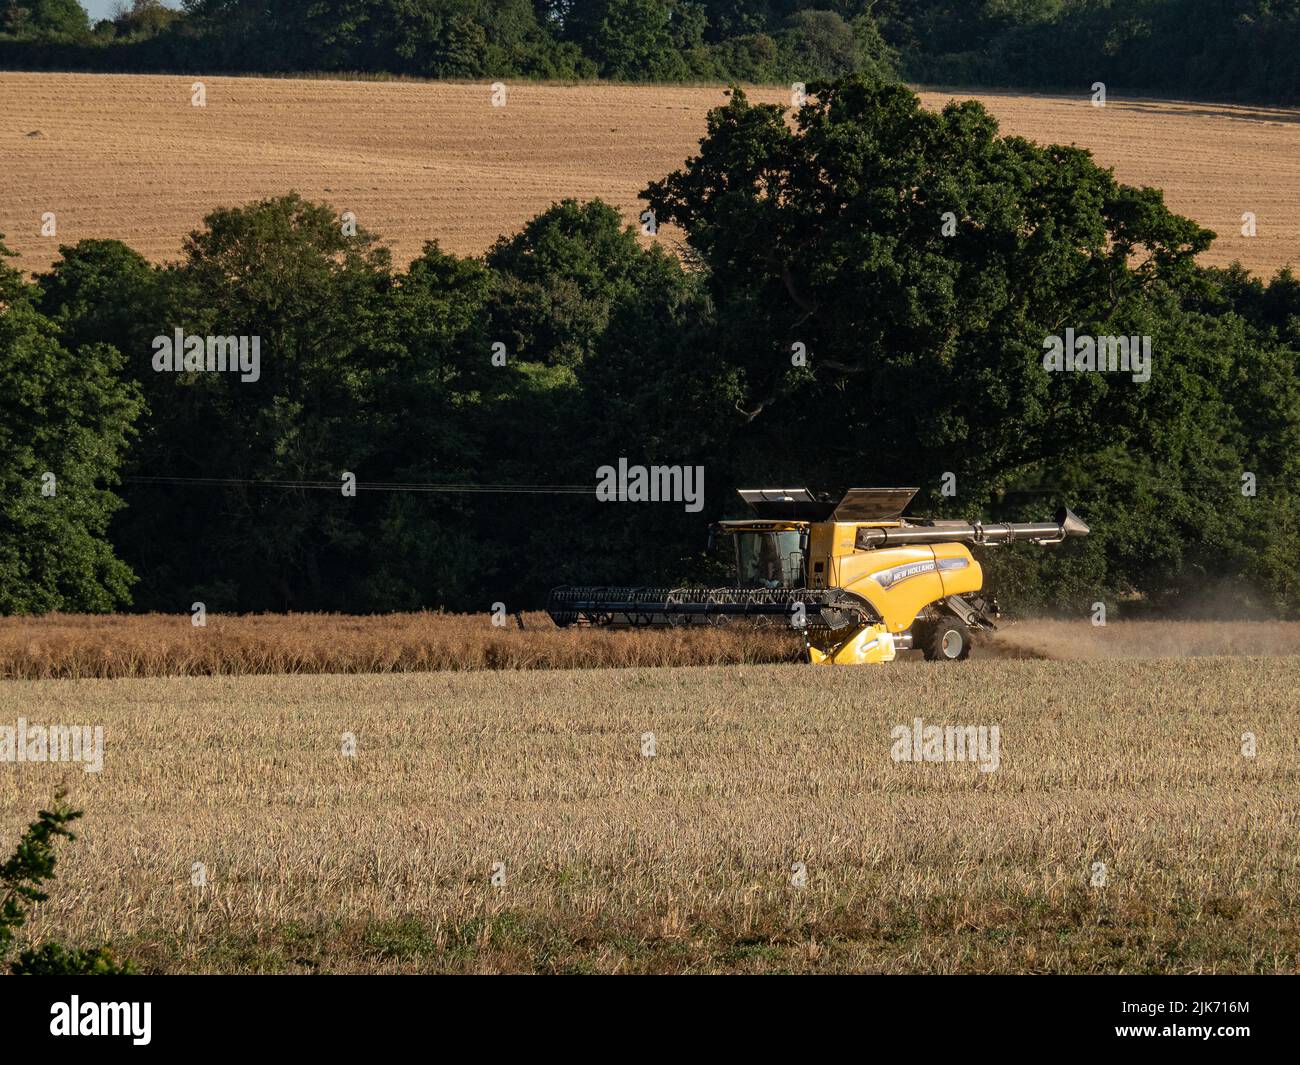 A New Holland CR990 twin rotor combine harvesting oilseed rape in a Suffolk landscape Stock Photo